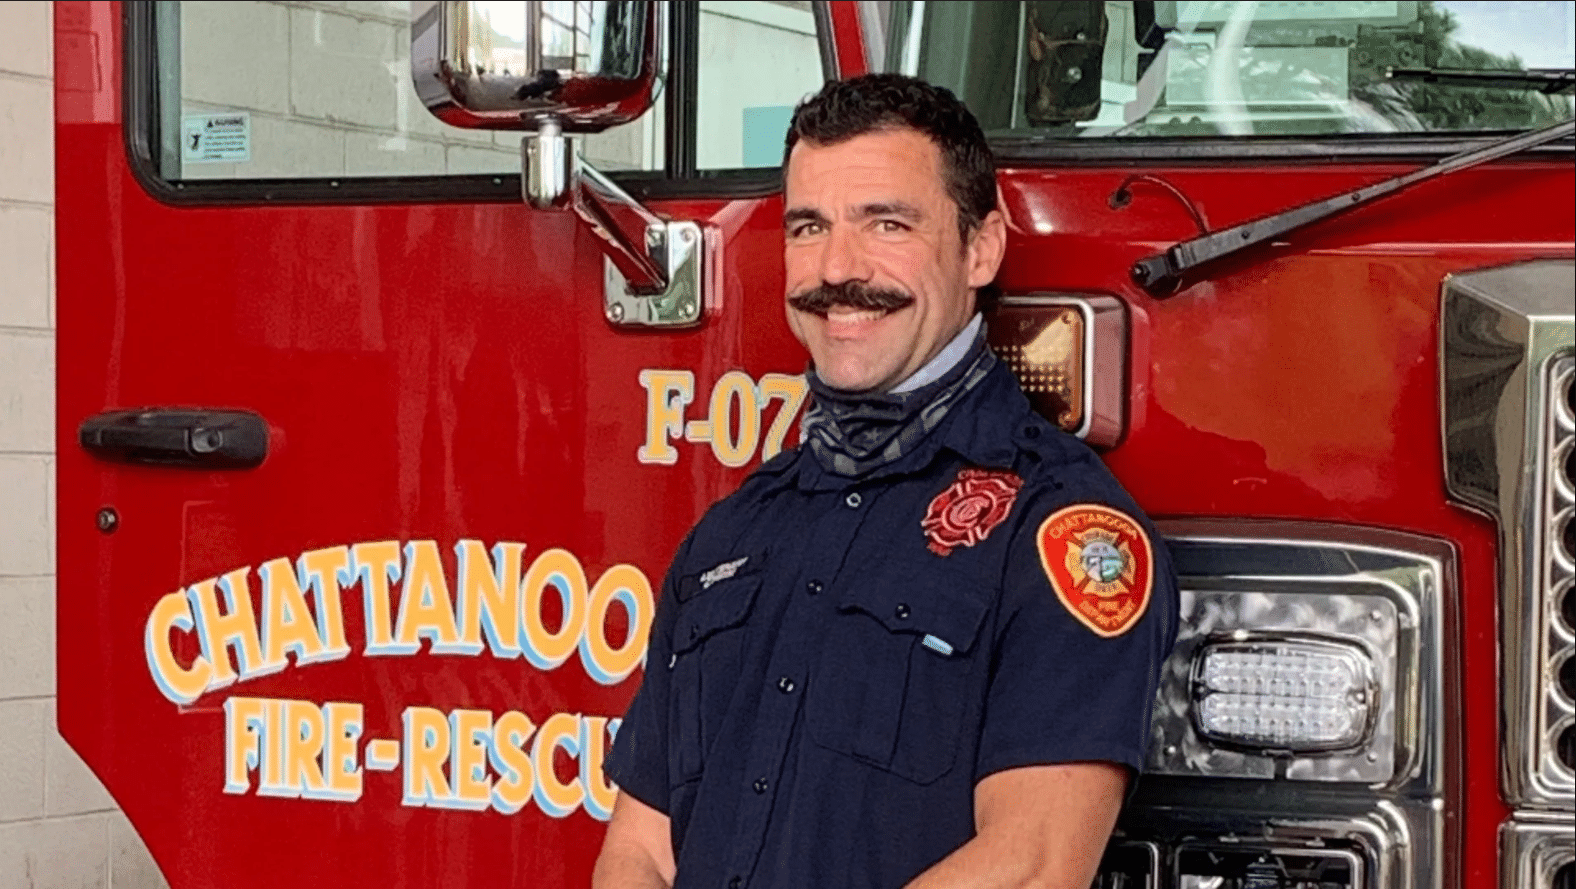 Source - Chattanooga Fire Department